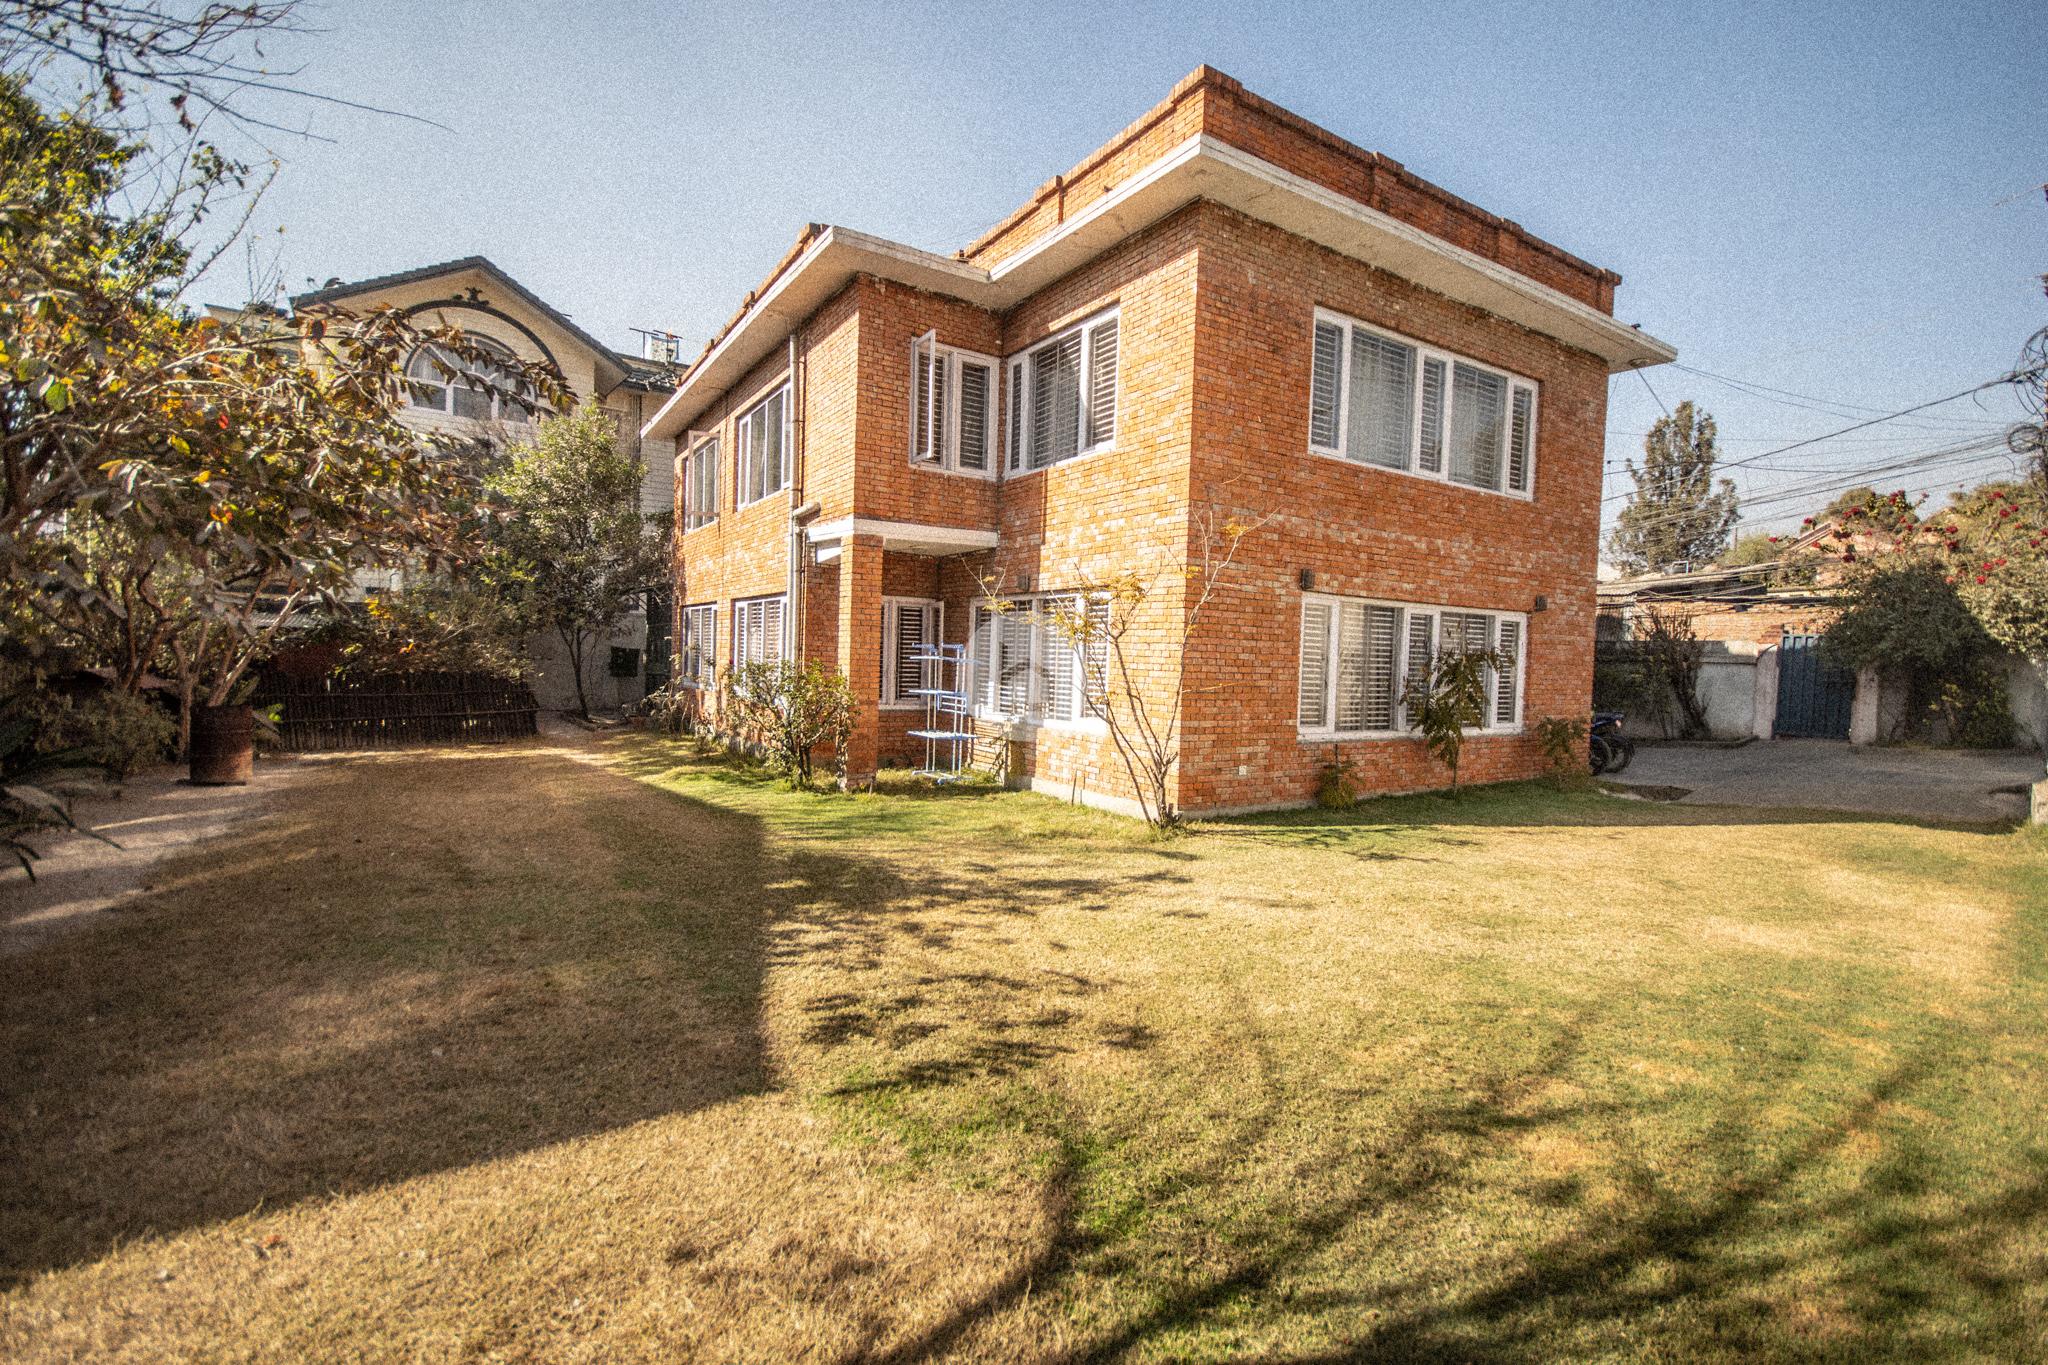 Attractive House is for Sale : House for Sale in Baluwatar, Kathmandu Image 1